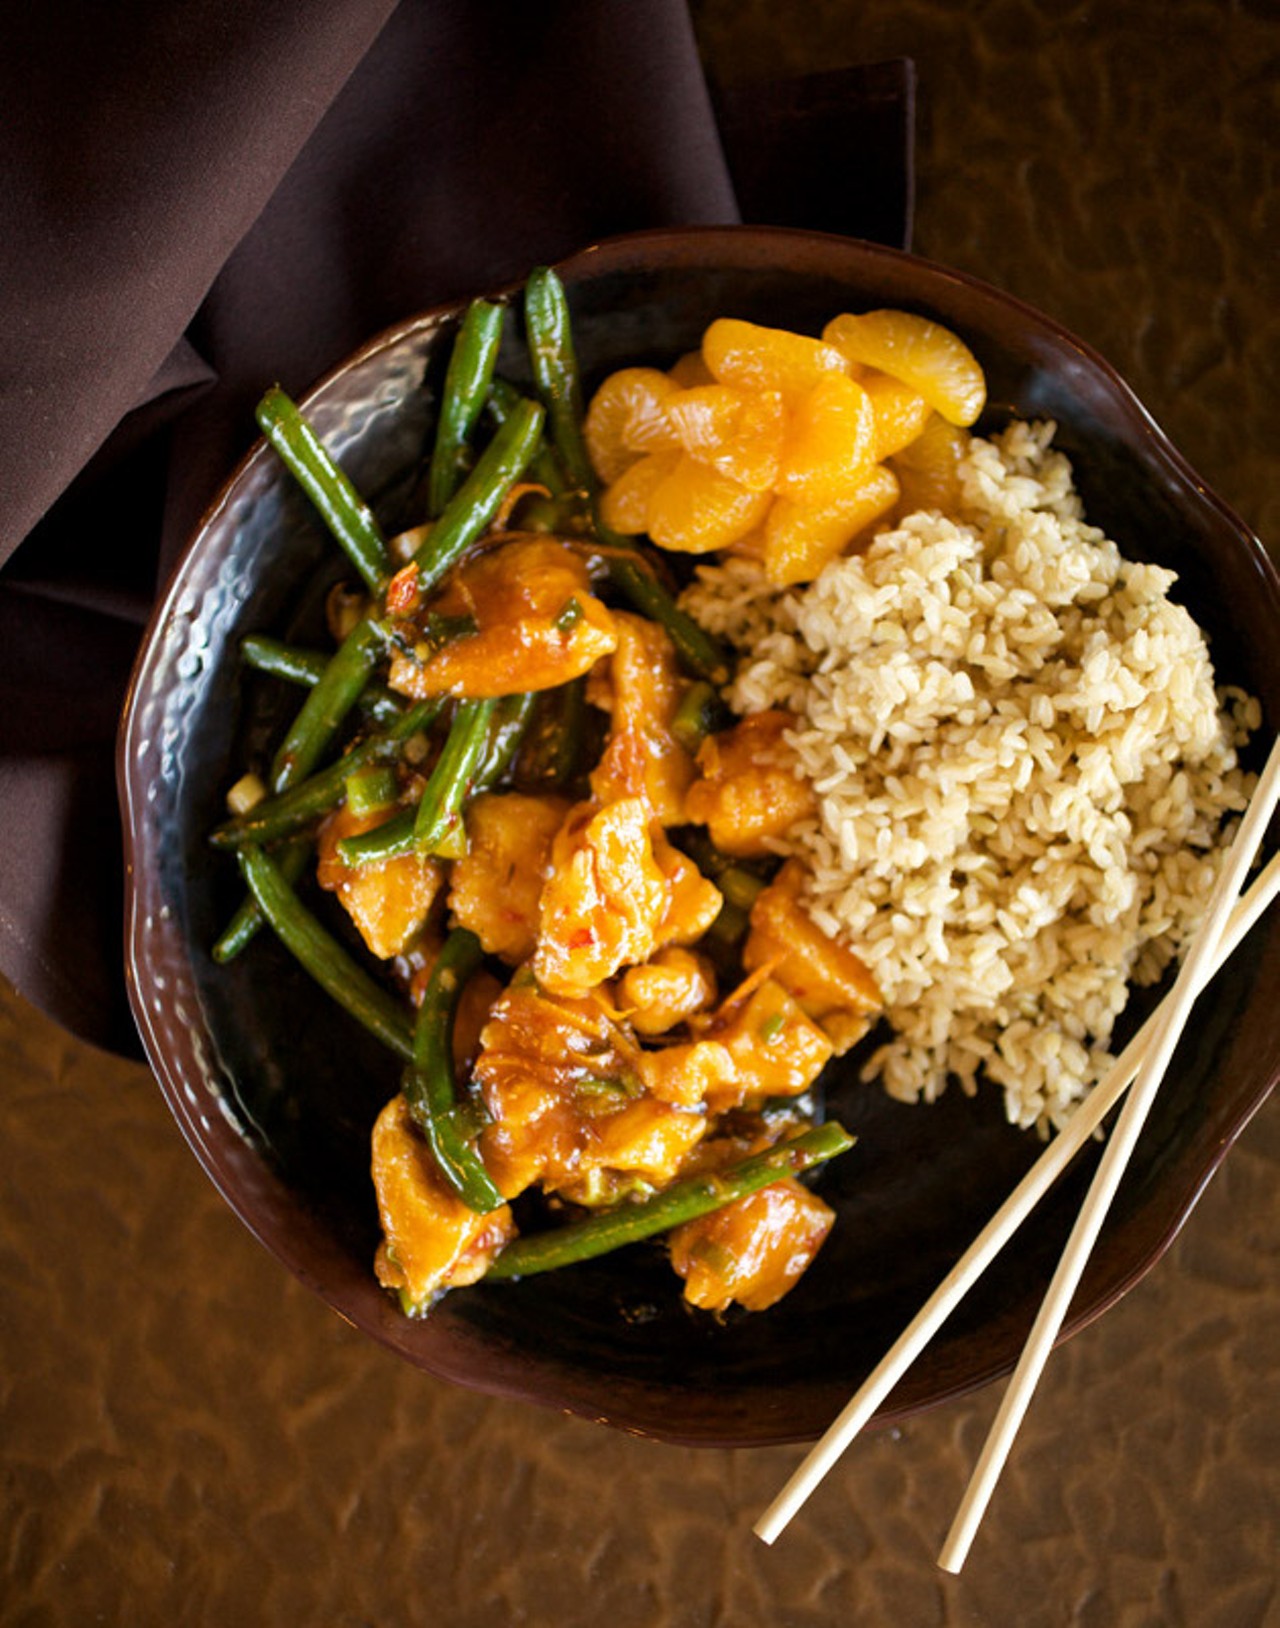 The Honey Orange entree comes with your choice of chicken, beef, shrimp, vegetable or tofu, as well as your choice of white or brown rice. Shown here with chicken, it is prepared with sweet orange ginger sauce tossed with green beans and served with a side of mandarin oranges.